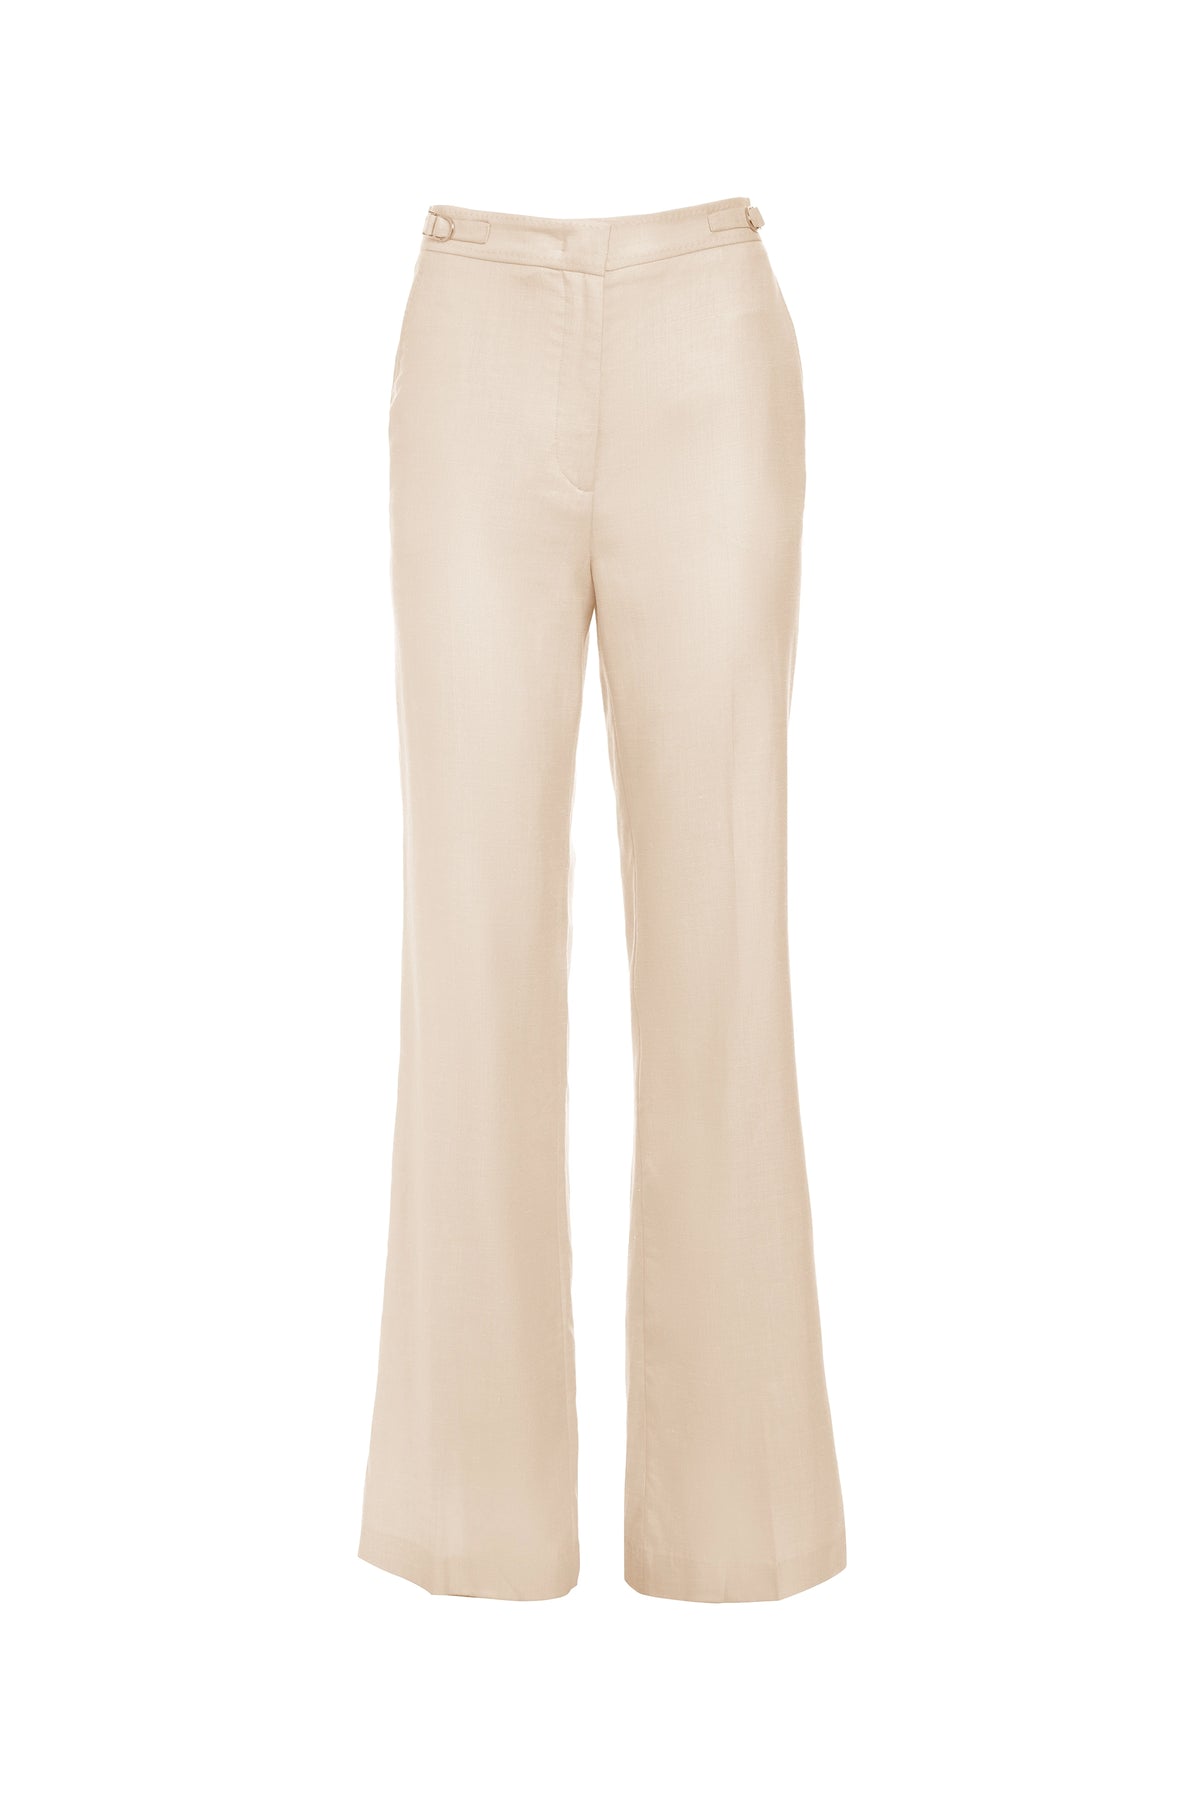 Vesta Pant in Oatmeal Silk Wool and Linen Twill